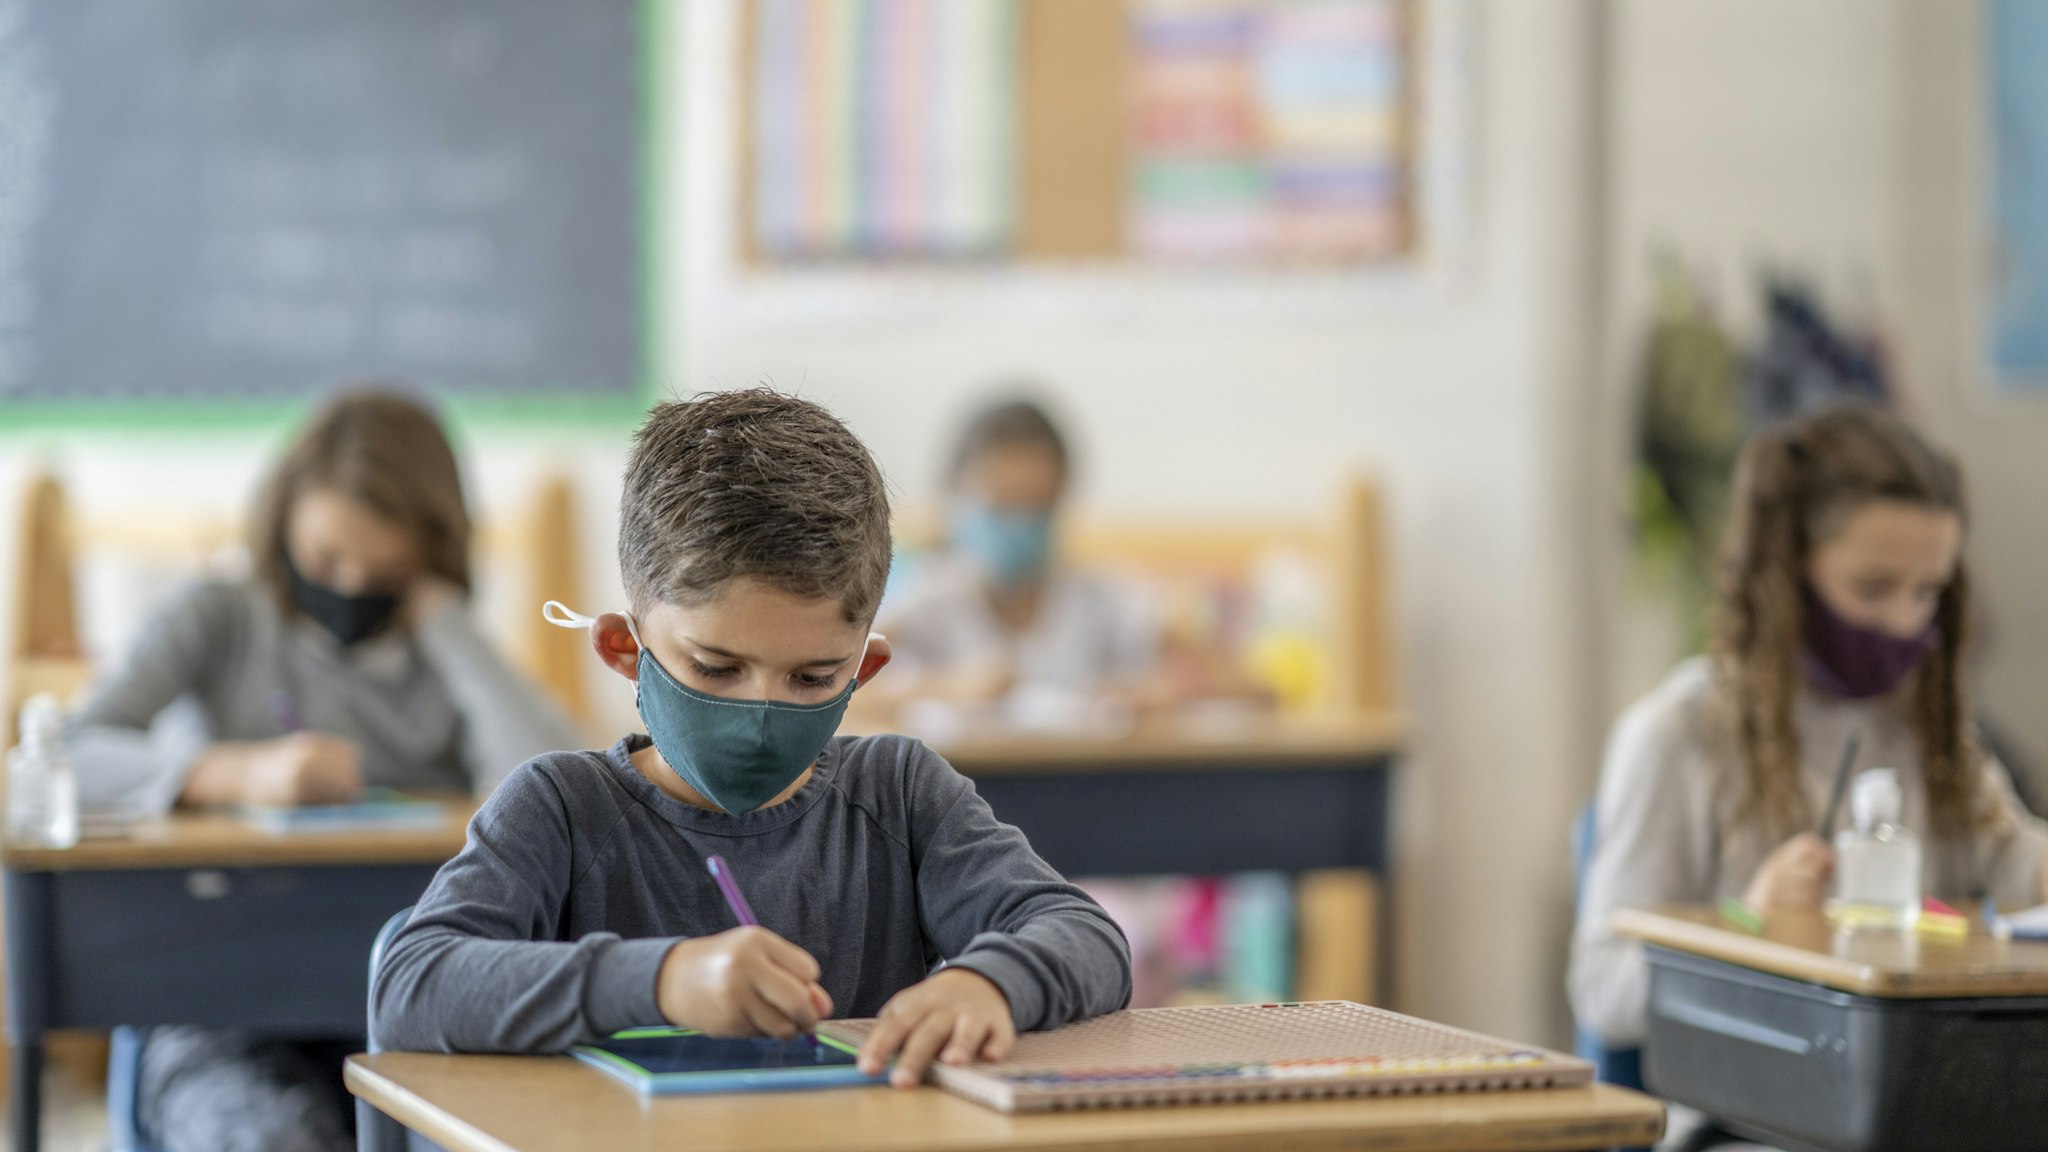 Students wearing masks in class - stock photo